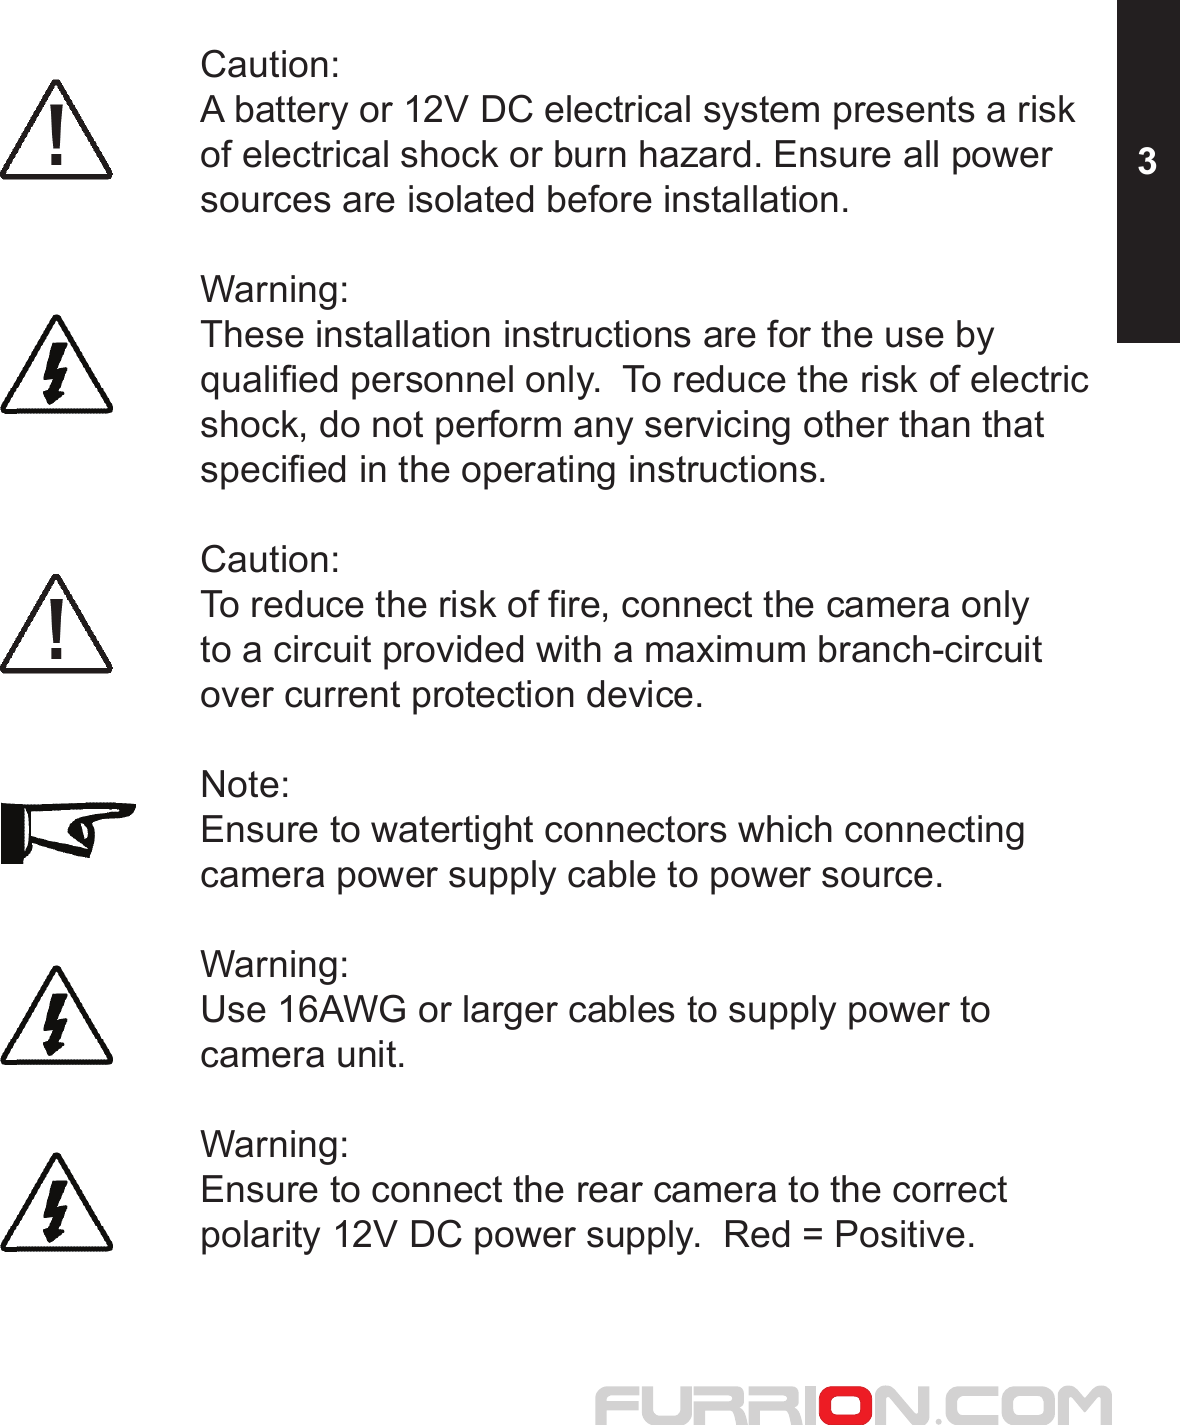 Caution:A battery or 12V DC electrical system presents a risk of electrical shock or burn hazard. Ensure all powersources are isolated before installation.Warning:These installation instructions are for the use by qualified personnel only.  To reduce the risk of electric shock, do not perform any servicing other than that specified in the operating instructions.Caution:To reduce the risk of fire, connect the camera onlyto a circuit provided with a maximum branch-circuitover current protection device.Note:Ensure to watertight connectors which connecting camera power supply cable to power source.Warning:Use 16AWG or larger cables to supply power to camera unit.Warning:Ensure to connect the rear camera to the correct polarity 12V DC power supply.  Red = Positive.3